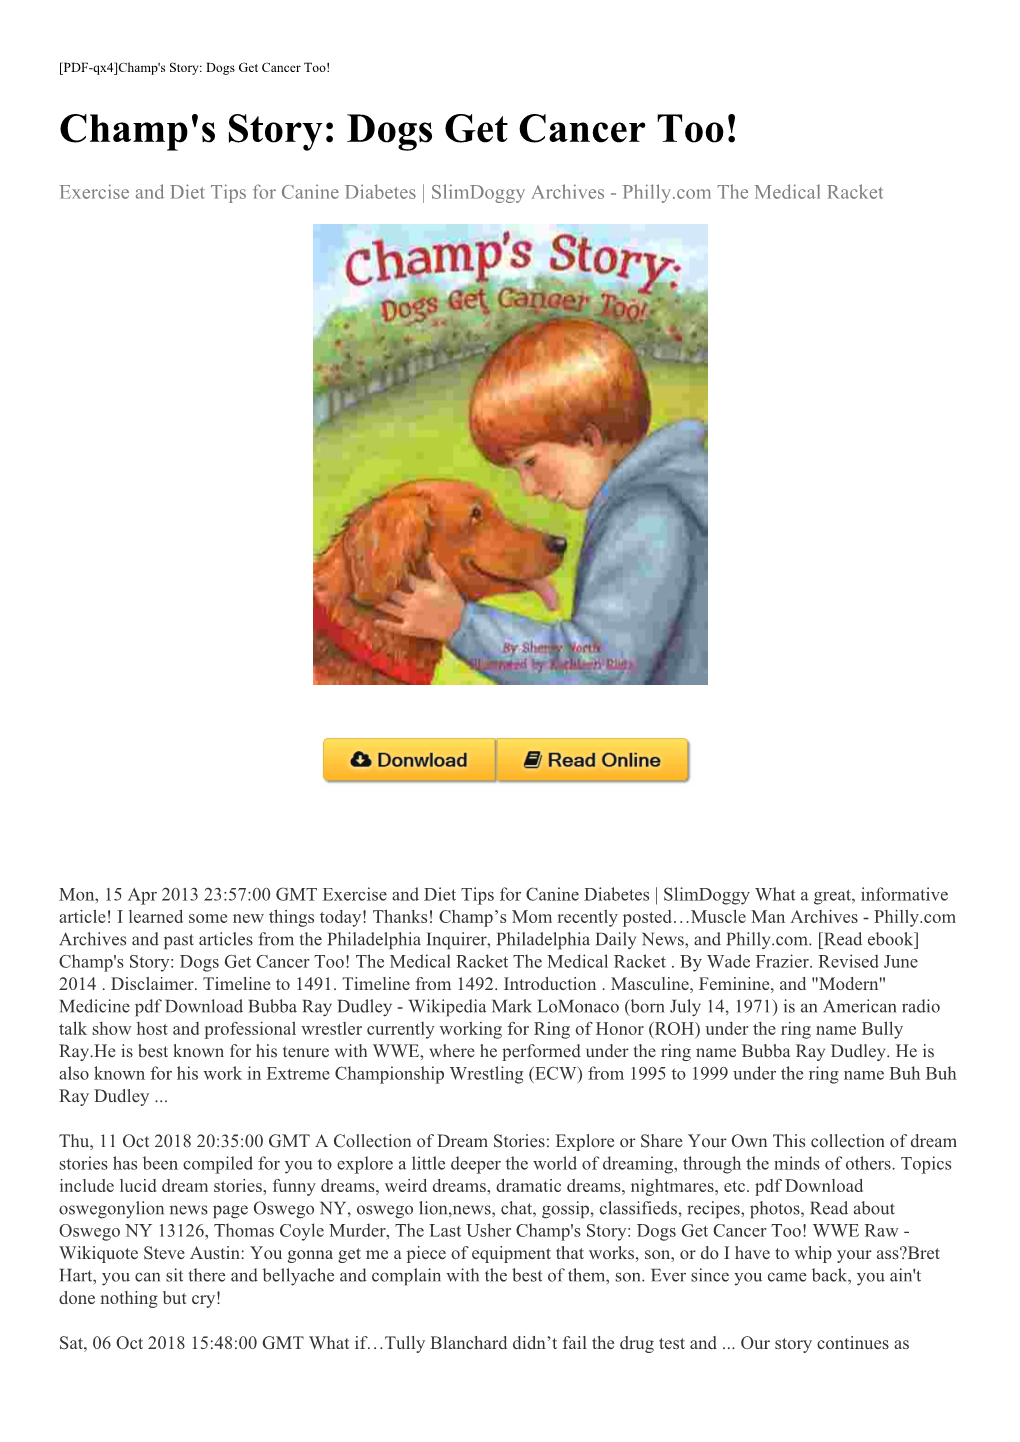 [Read Ebook] Champ's Story: Dogs Get Cancer Too! the Medical Racket the Medical Racket